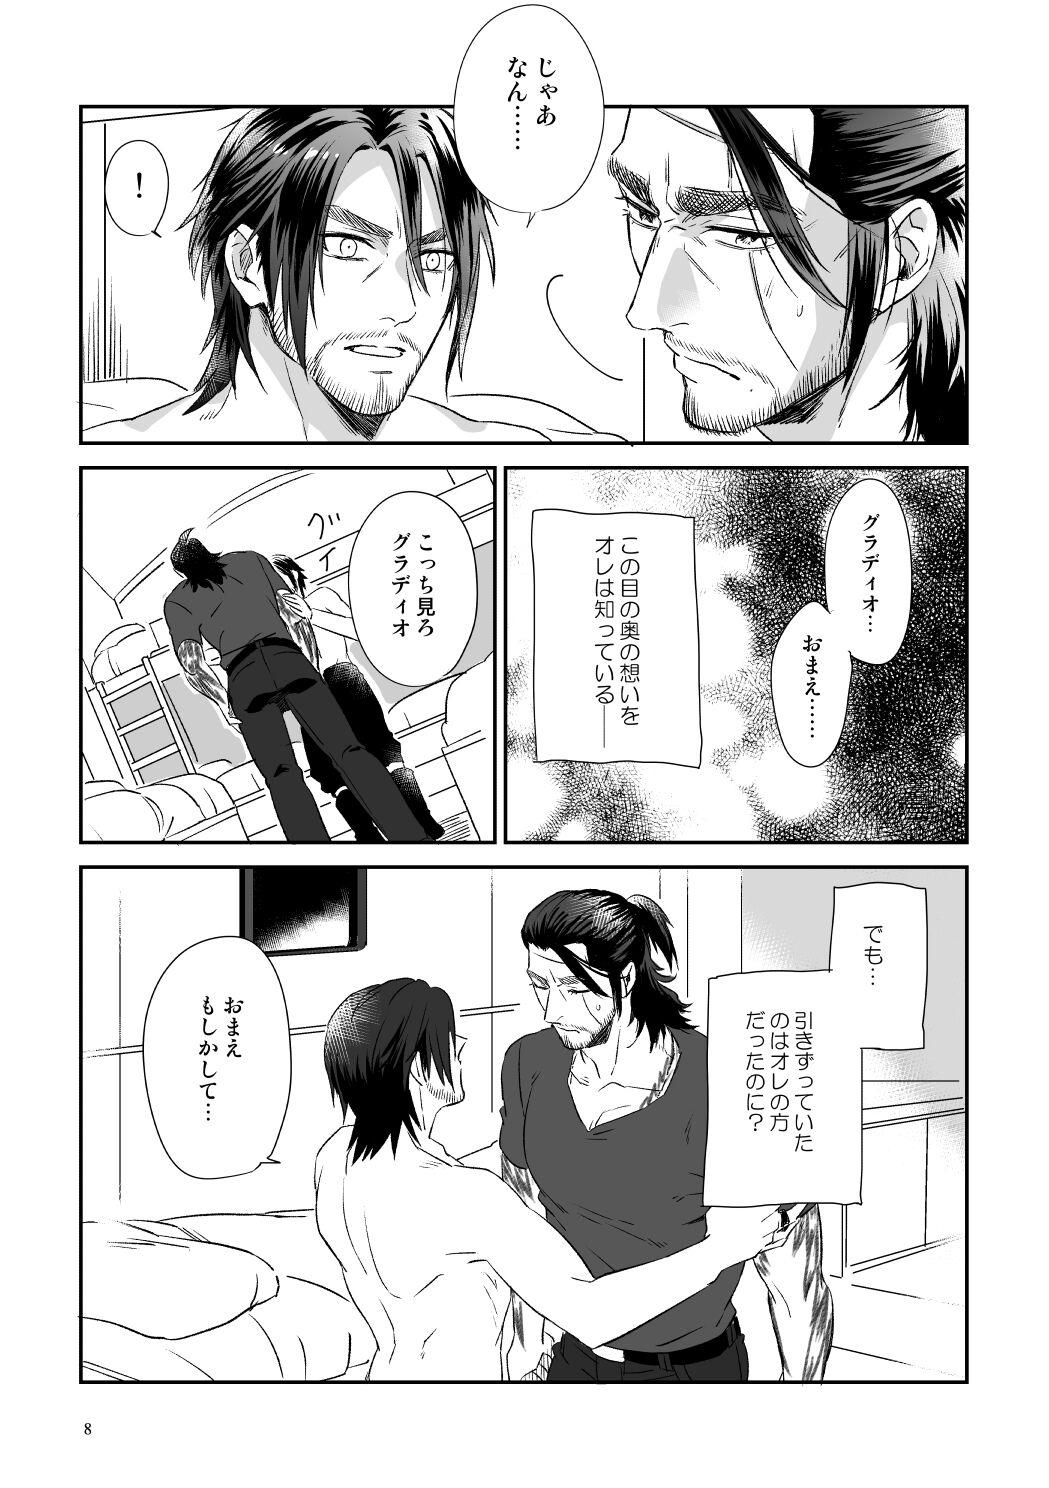 Lovers Bright Road - Final fantasy xv Forwomen - Page 6